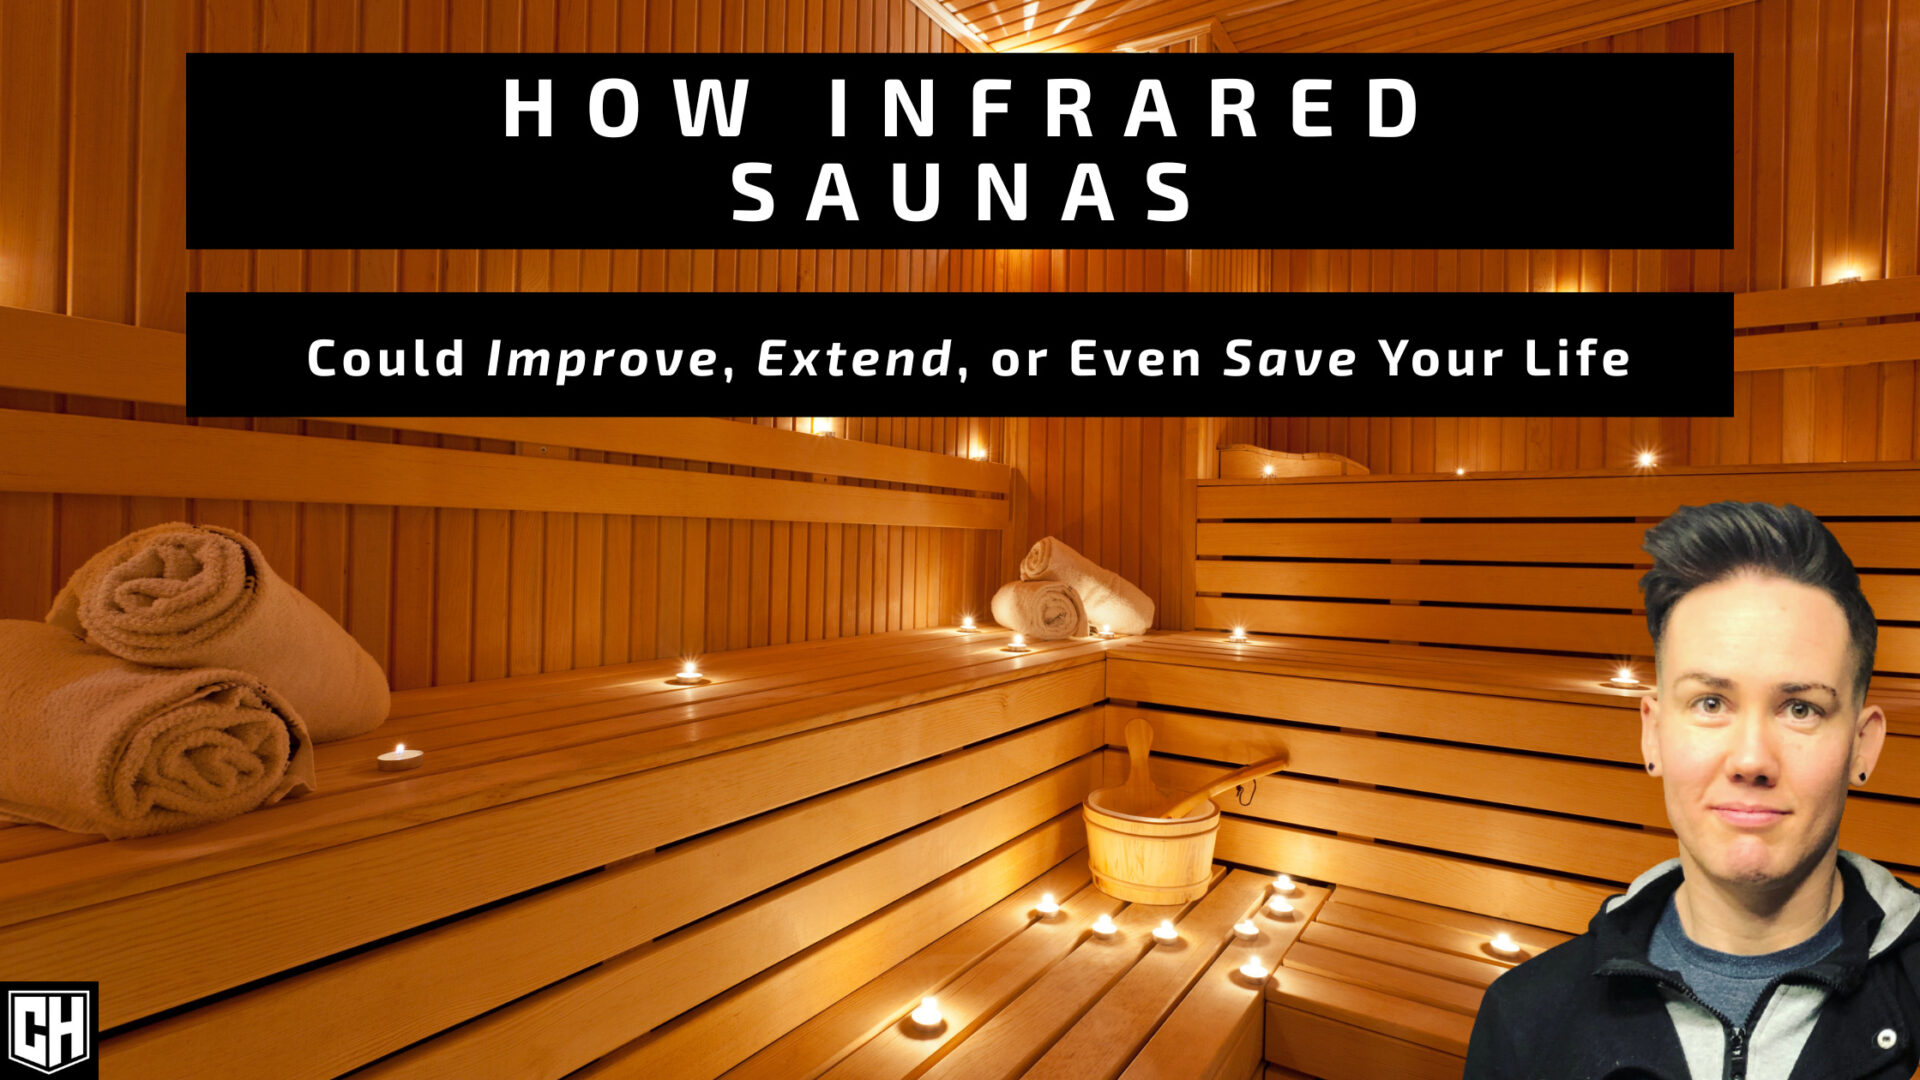 How Infrared Saunas Could Improve Extend Or Even Save Your Life